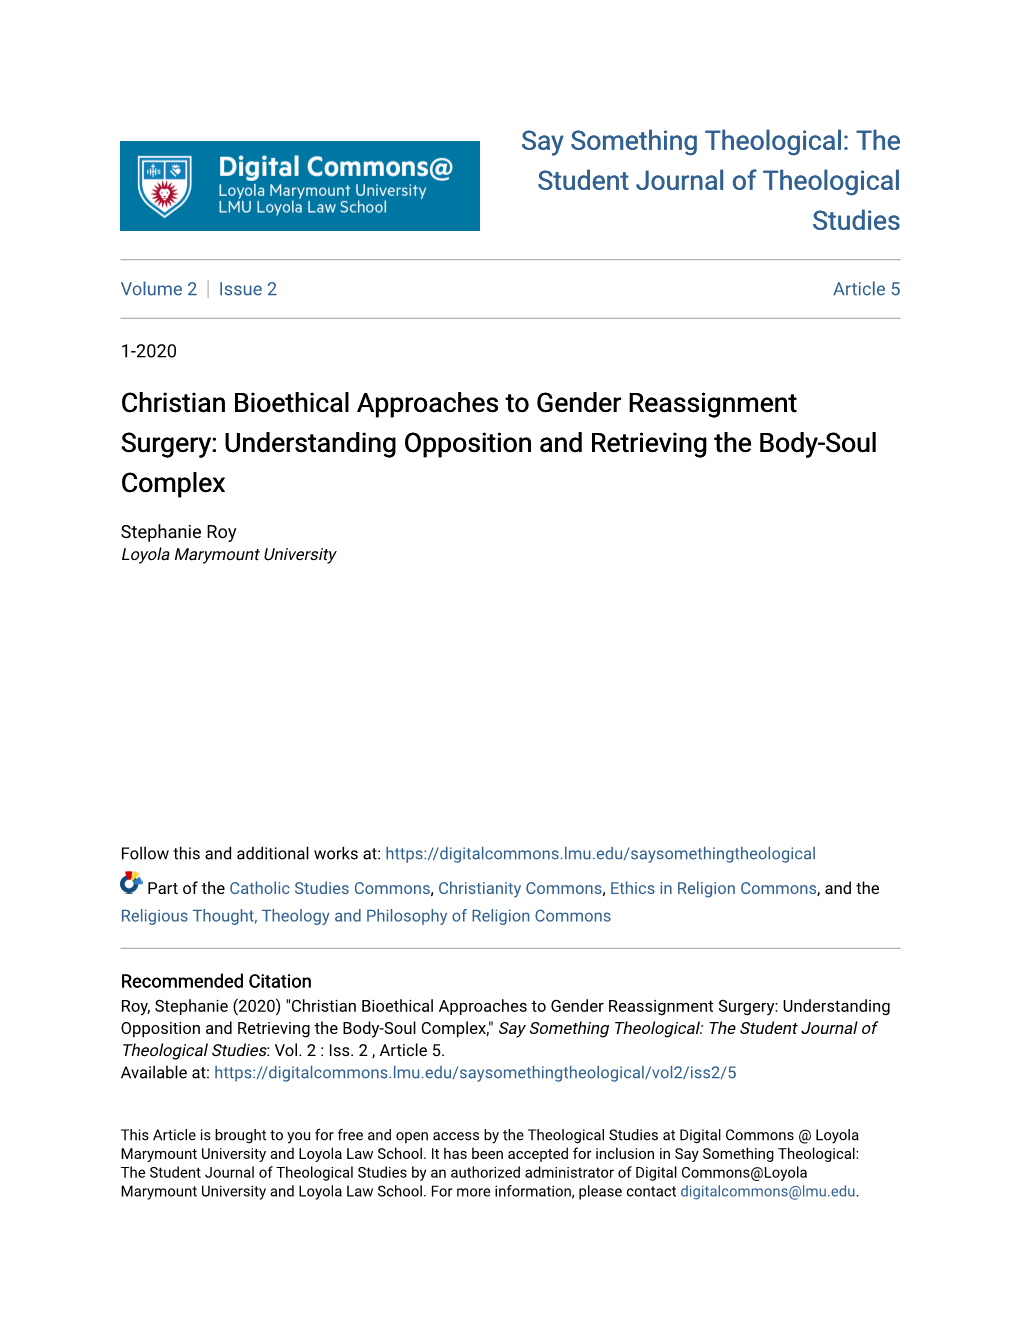 Christian Bioethical Approaches to Gender Reassignment Surgery: Understanding Opposition and Retrieving the Body-Soul Complex